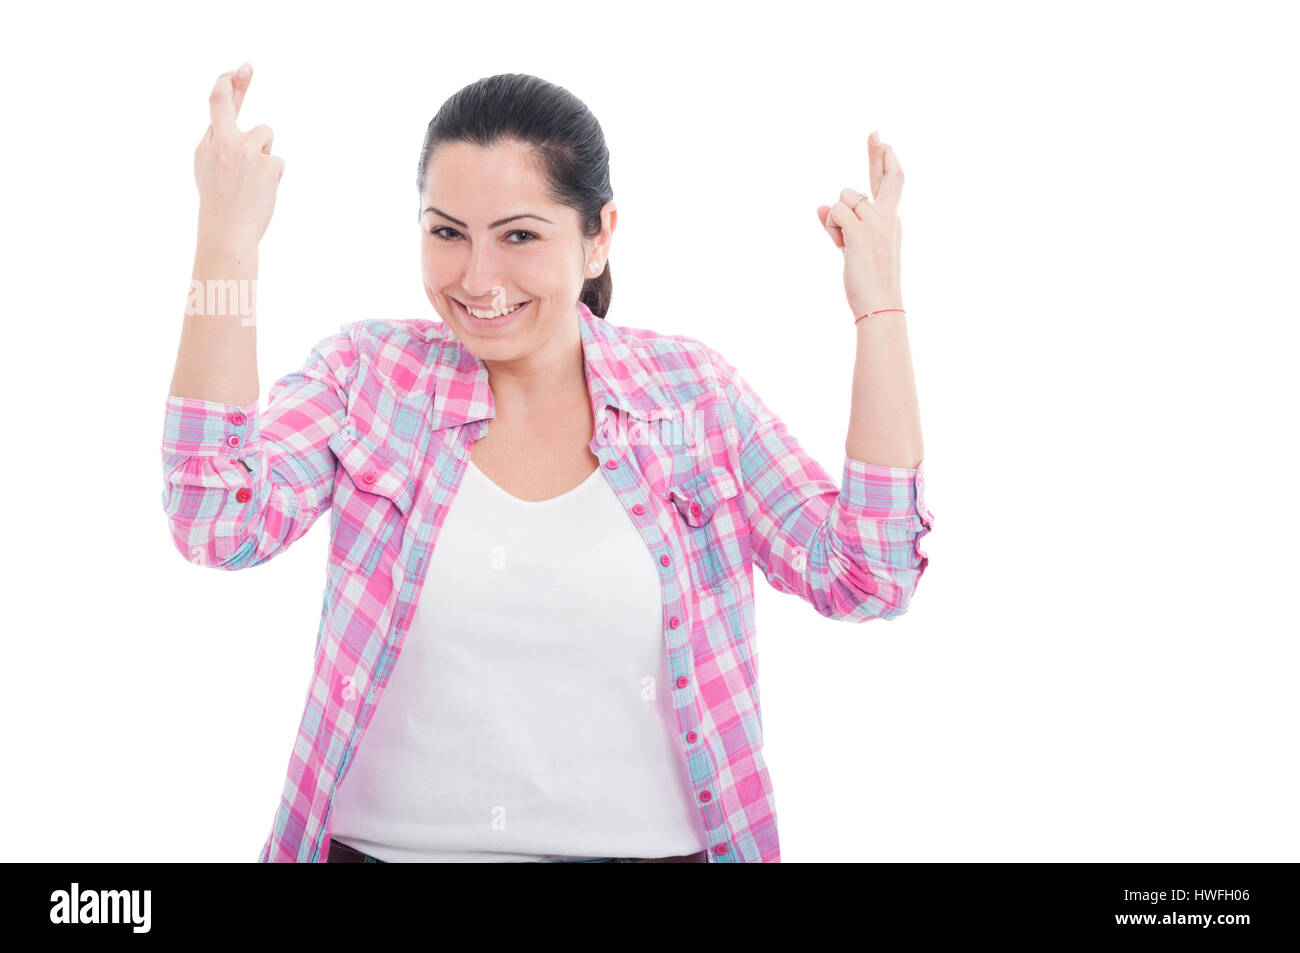 Portrait Of Joyful Woman Wishing Luck With Crossed Fingers From Both